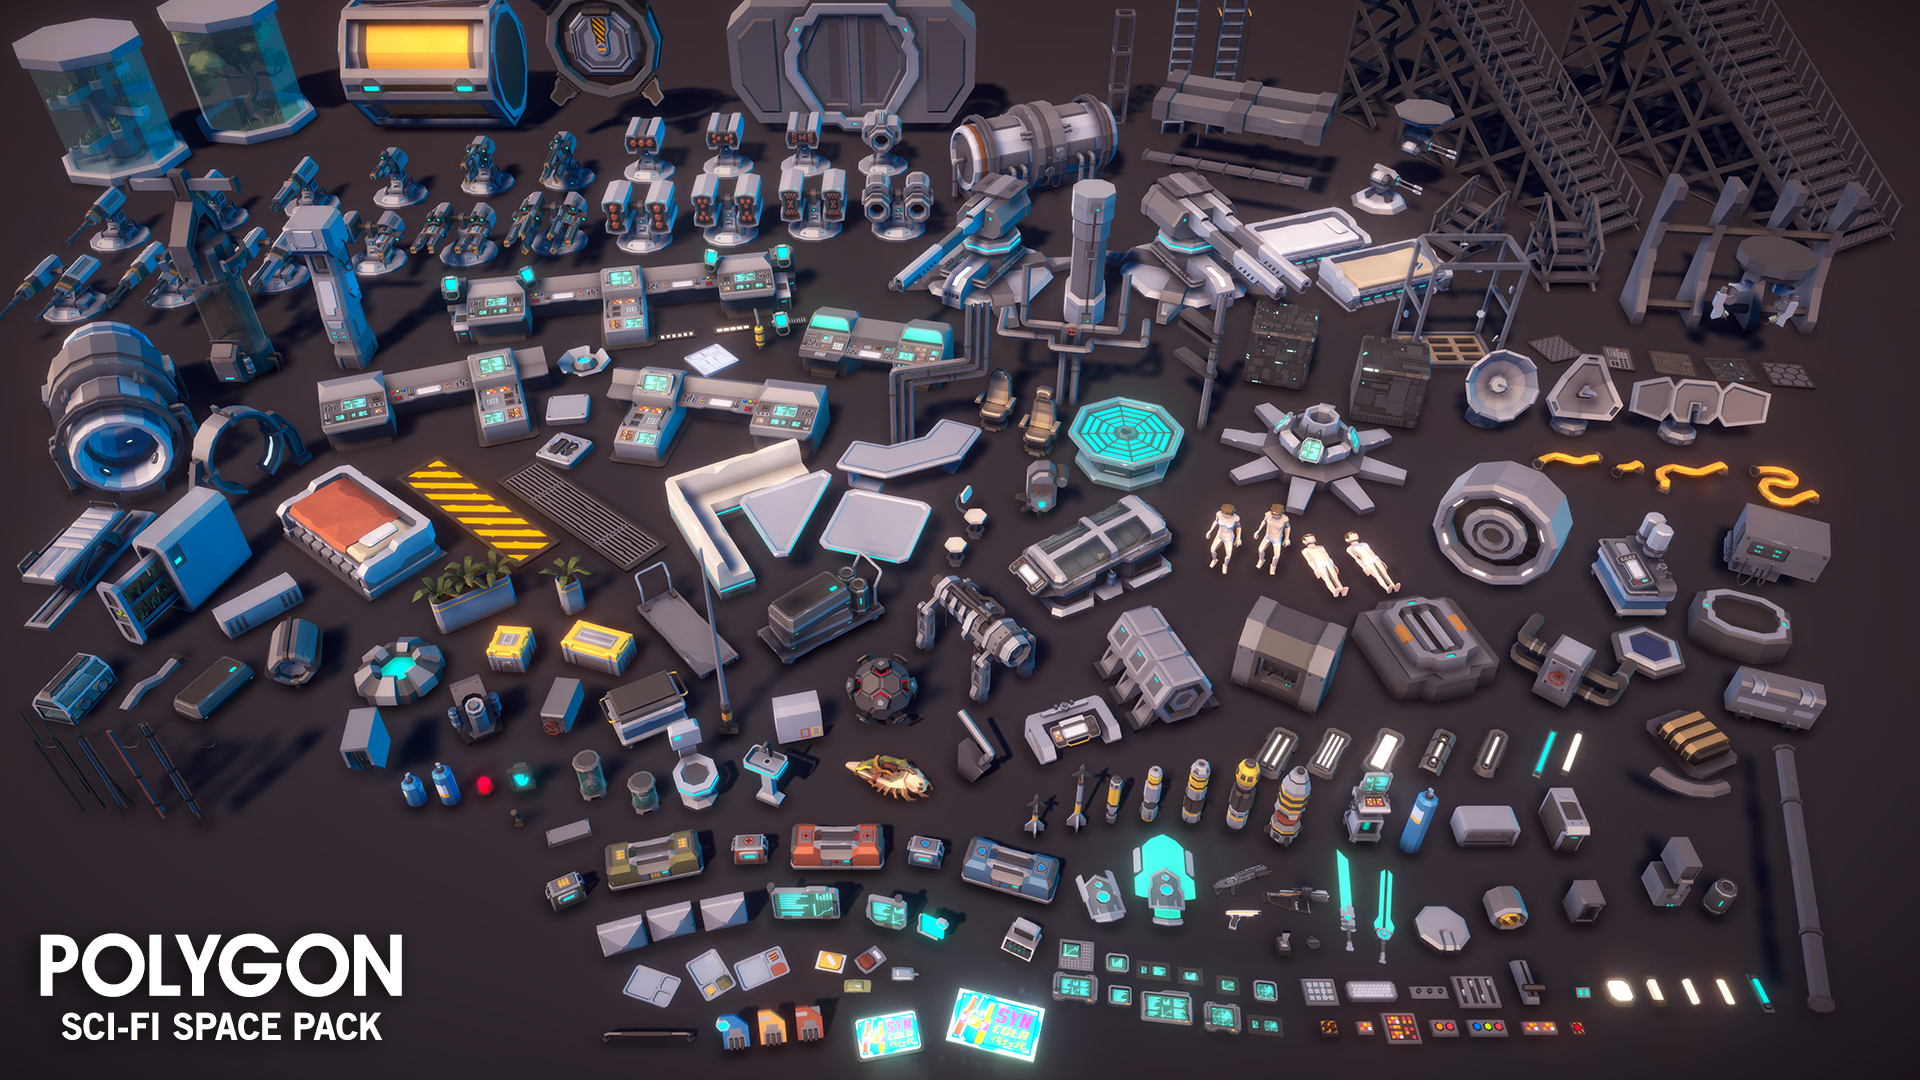 POLYGON - Sci-Fi Space Pack - Synty Studios - Unity and Unreal 3D low poly assets for game development